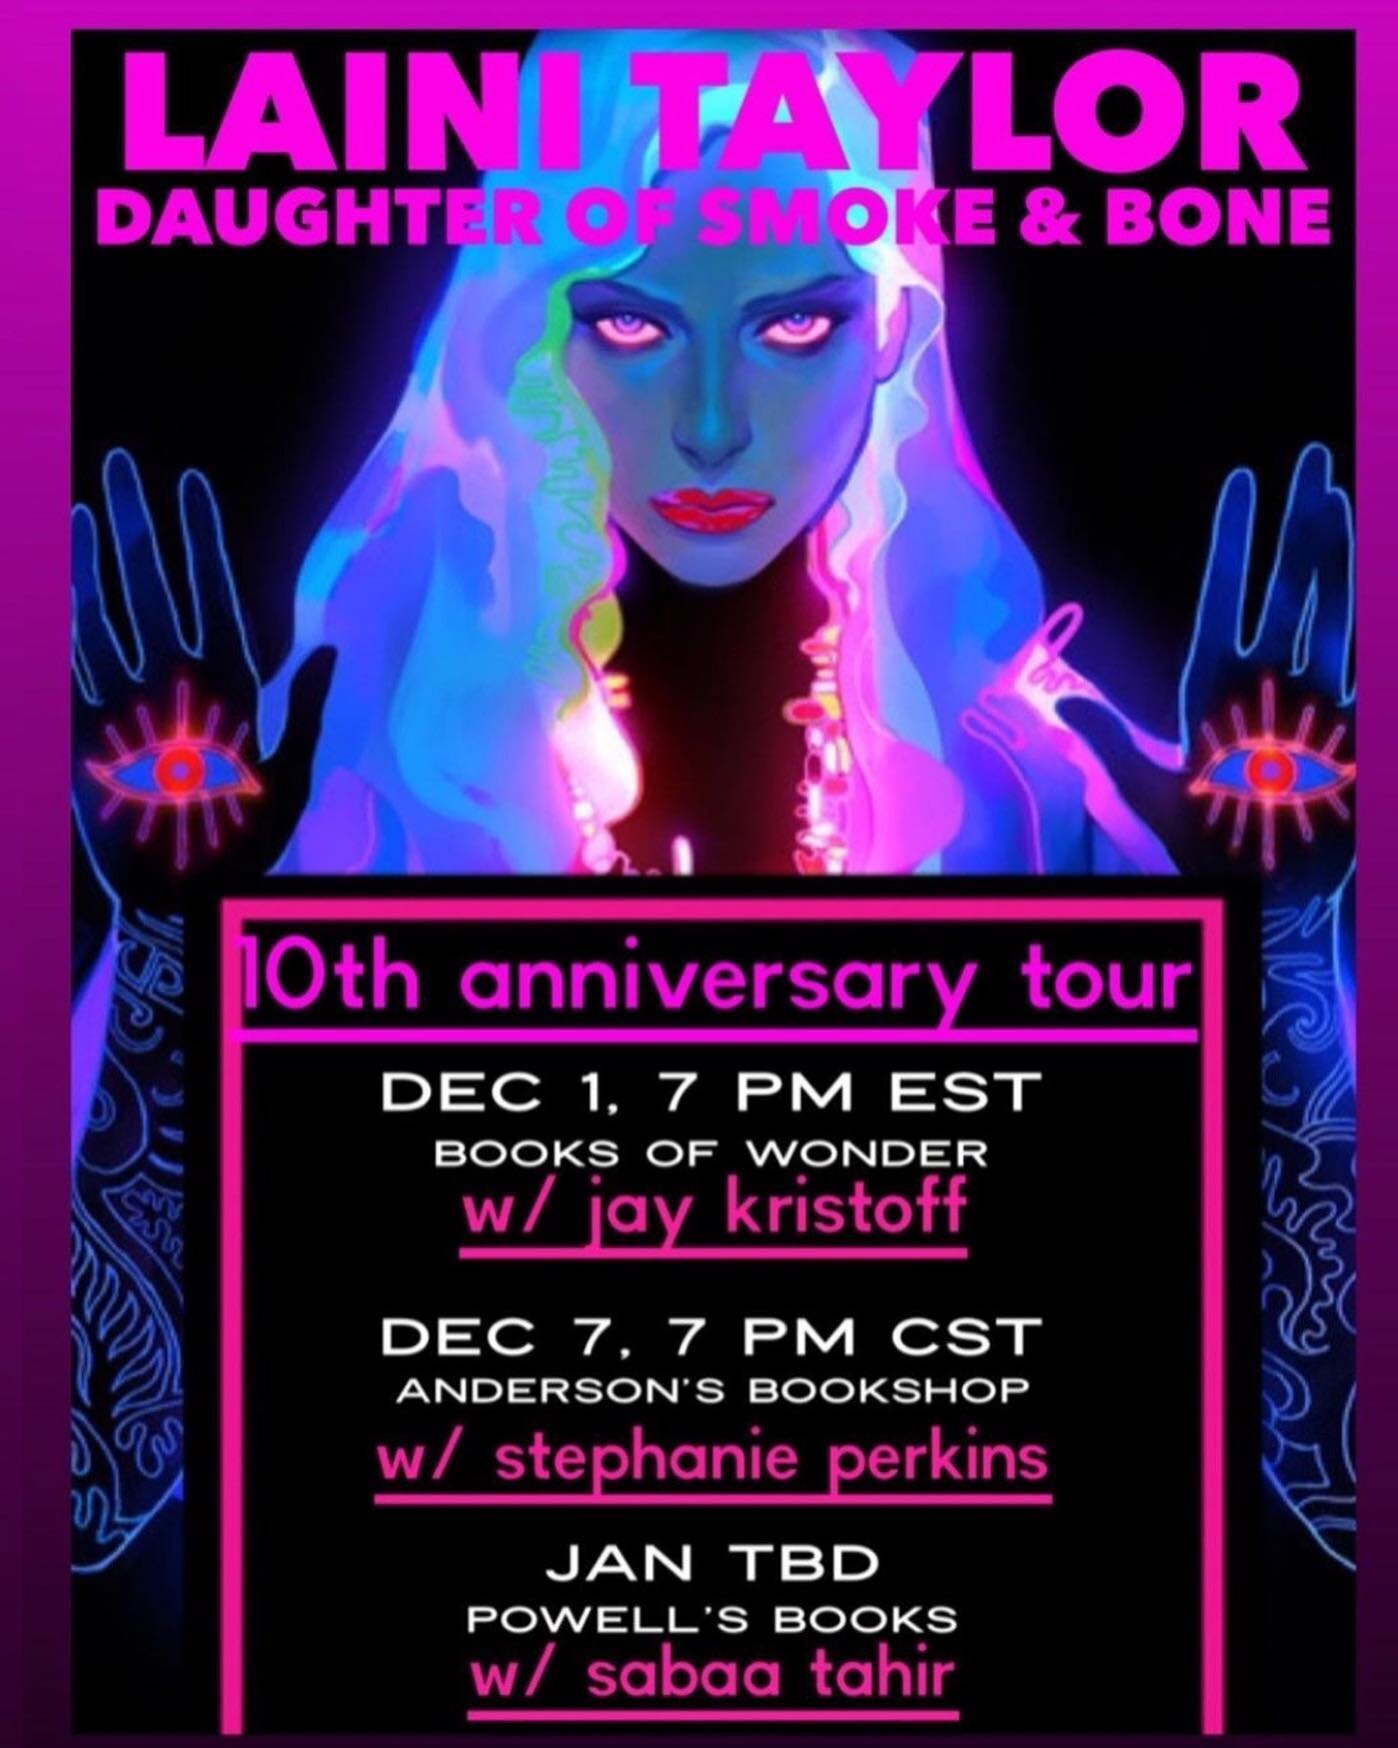 Monday night! I&rsquo;m talking about tenth anniversary editions (!!!)&mdash;DAUGHTER OF SMOKE &amp; BONE and ANNA AND THE FRENCH KISS&mdash;with the magical @lainit for an online event with @andersonsbookshop. Laini was my first published author fri